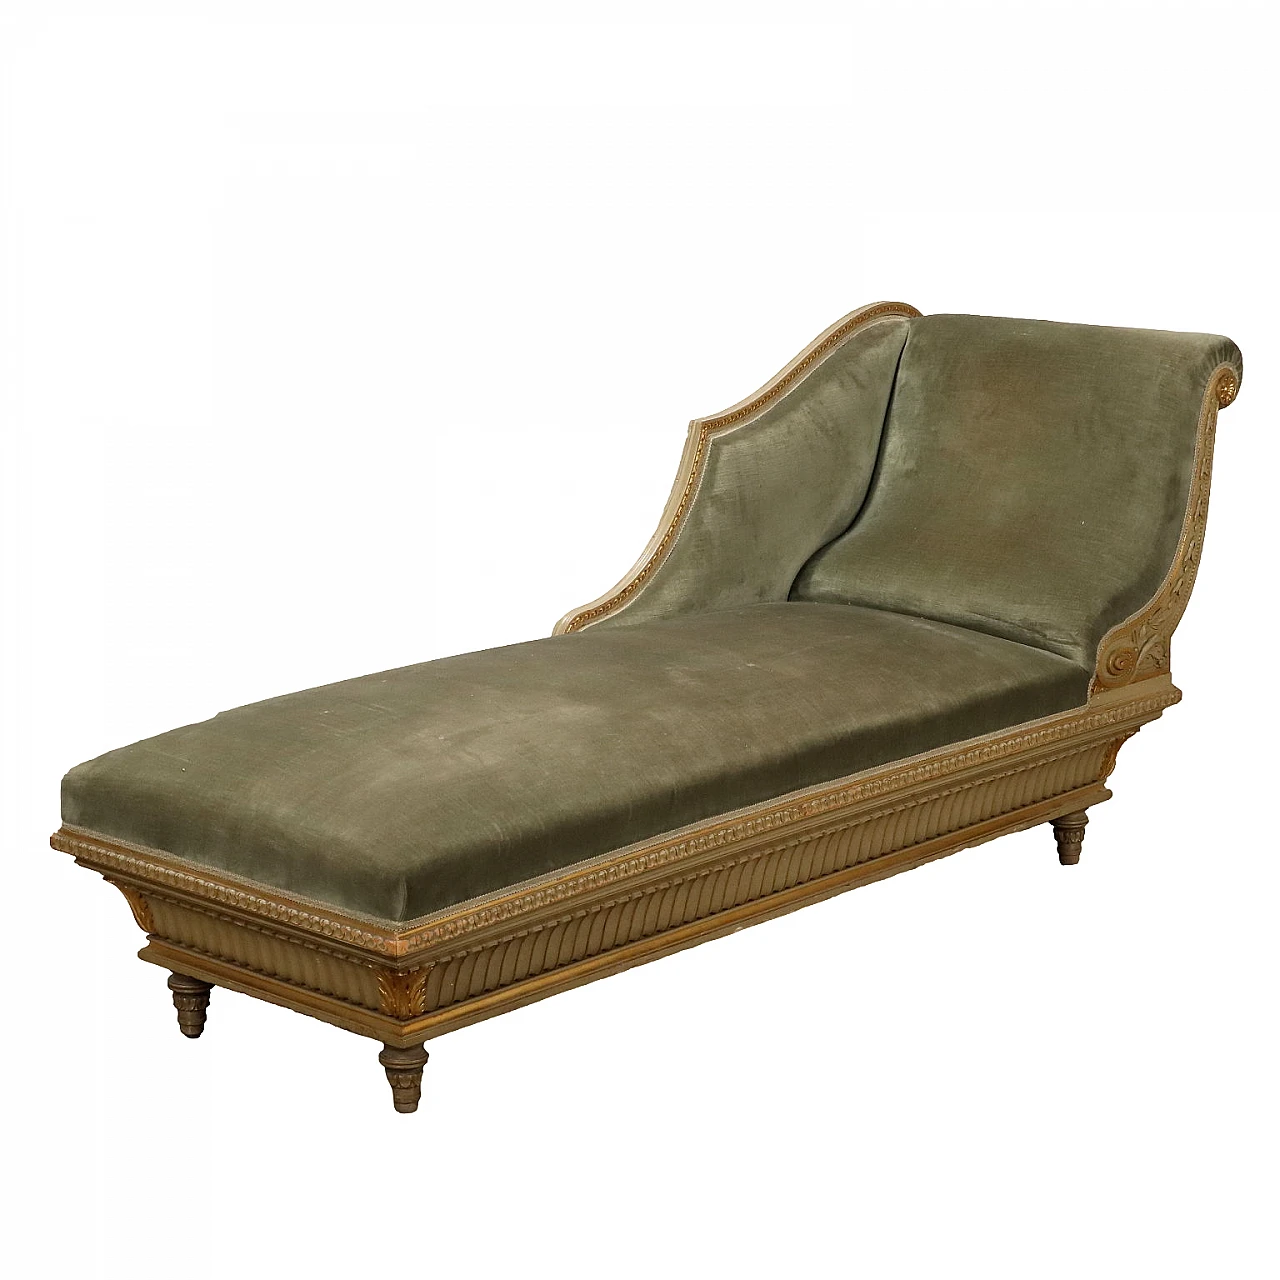 Laquered and gilded wood dormeuse with velour upholstery 1